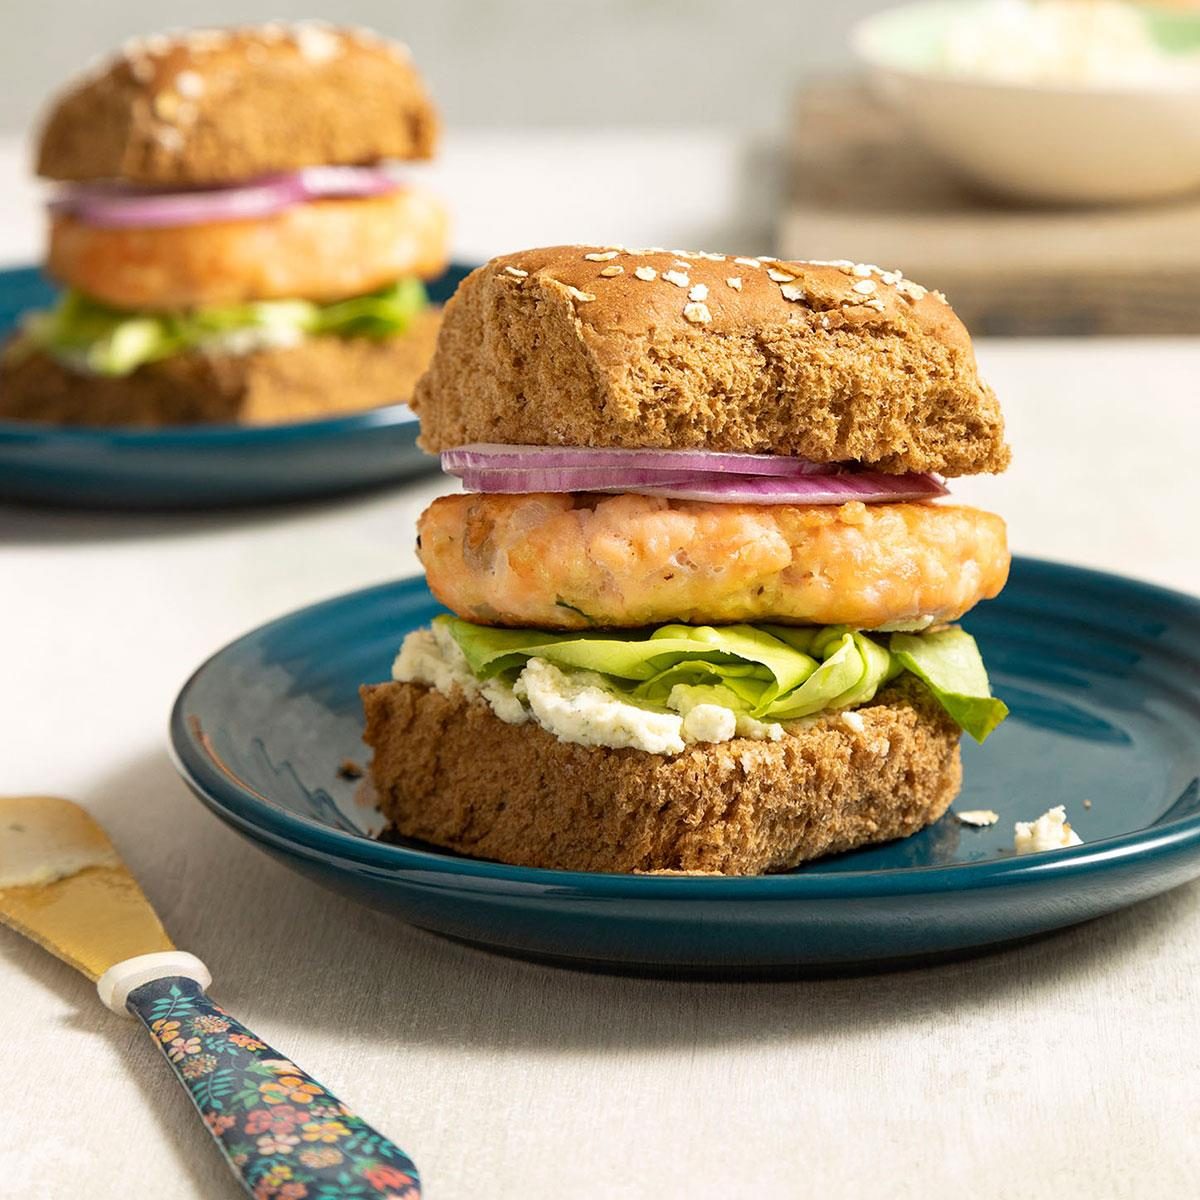 <p>The fresh flavors of the salmon and herbs are just unbeatable. I serve these as full-size burgers on kaiser rolls, too. —Margee Berry, White Salmon, Washington</p> <div class="listicle-page__buttons"> <div class="listicle-page__cta-button"><a href='https://www.tasteofhome.com/recipes/garlic-herb-salmon-sliders/'>Go to Recipe</a></div> </div>